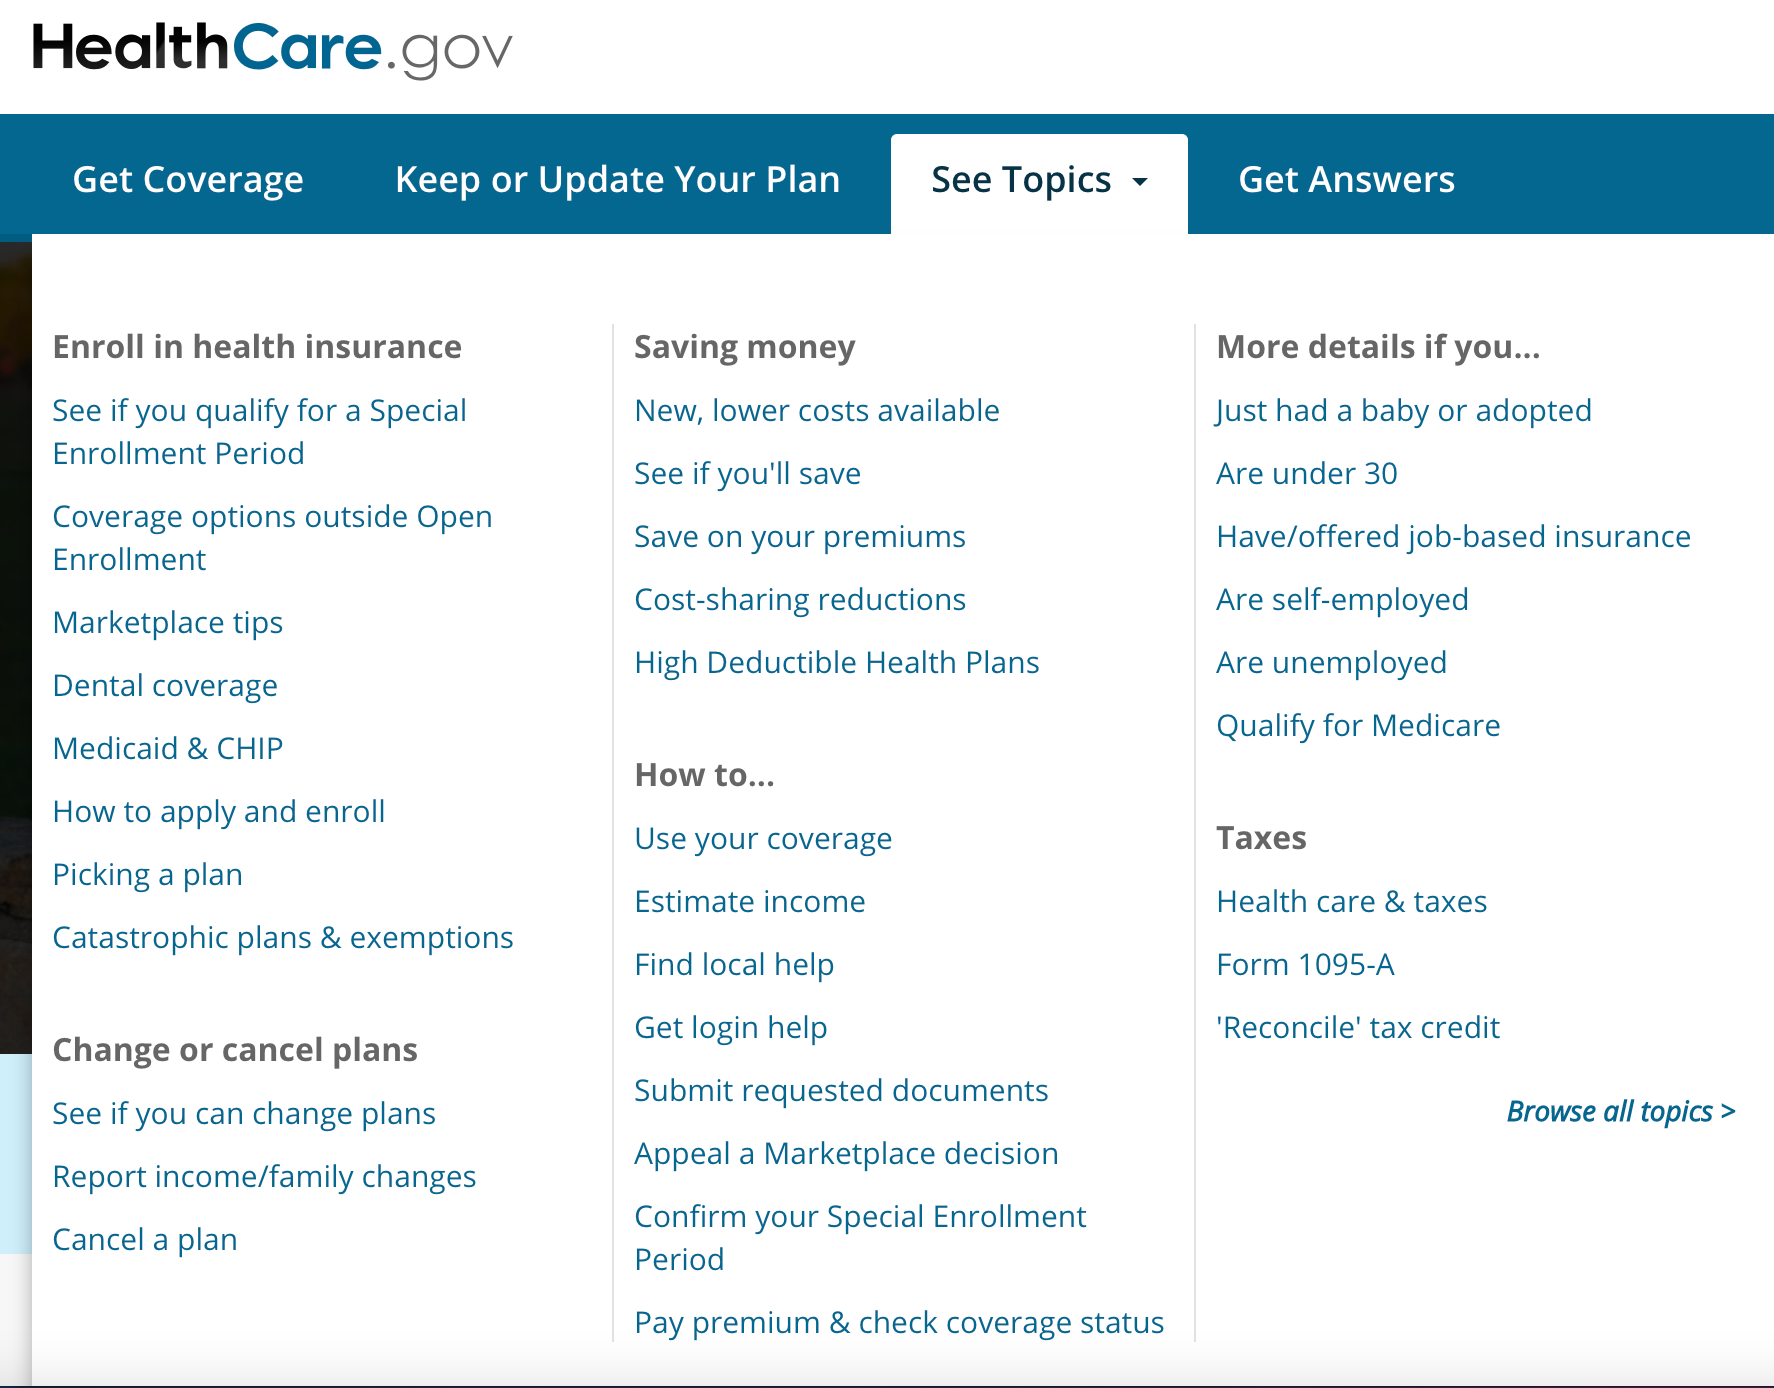 Webpage from Healthcare.gov.